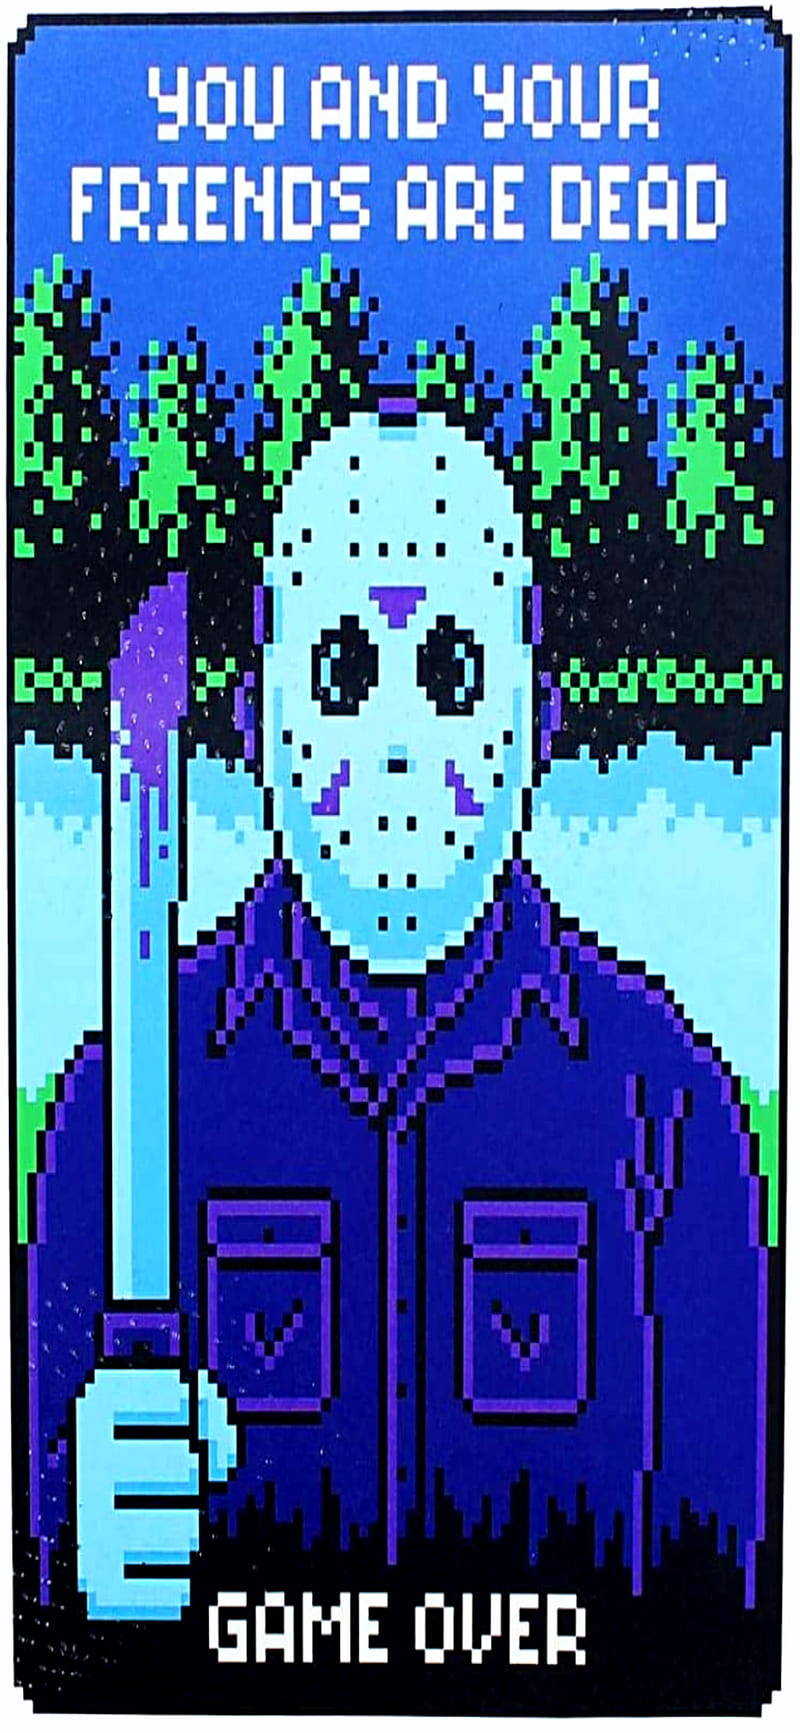 Friday the 13th: The Game Phone Wallpaper - Mobile Abyss